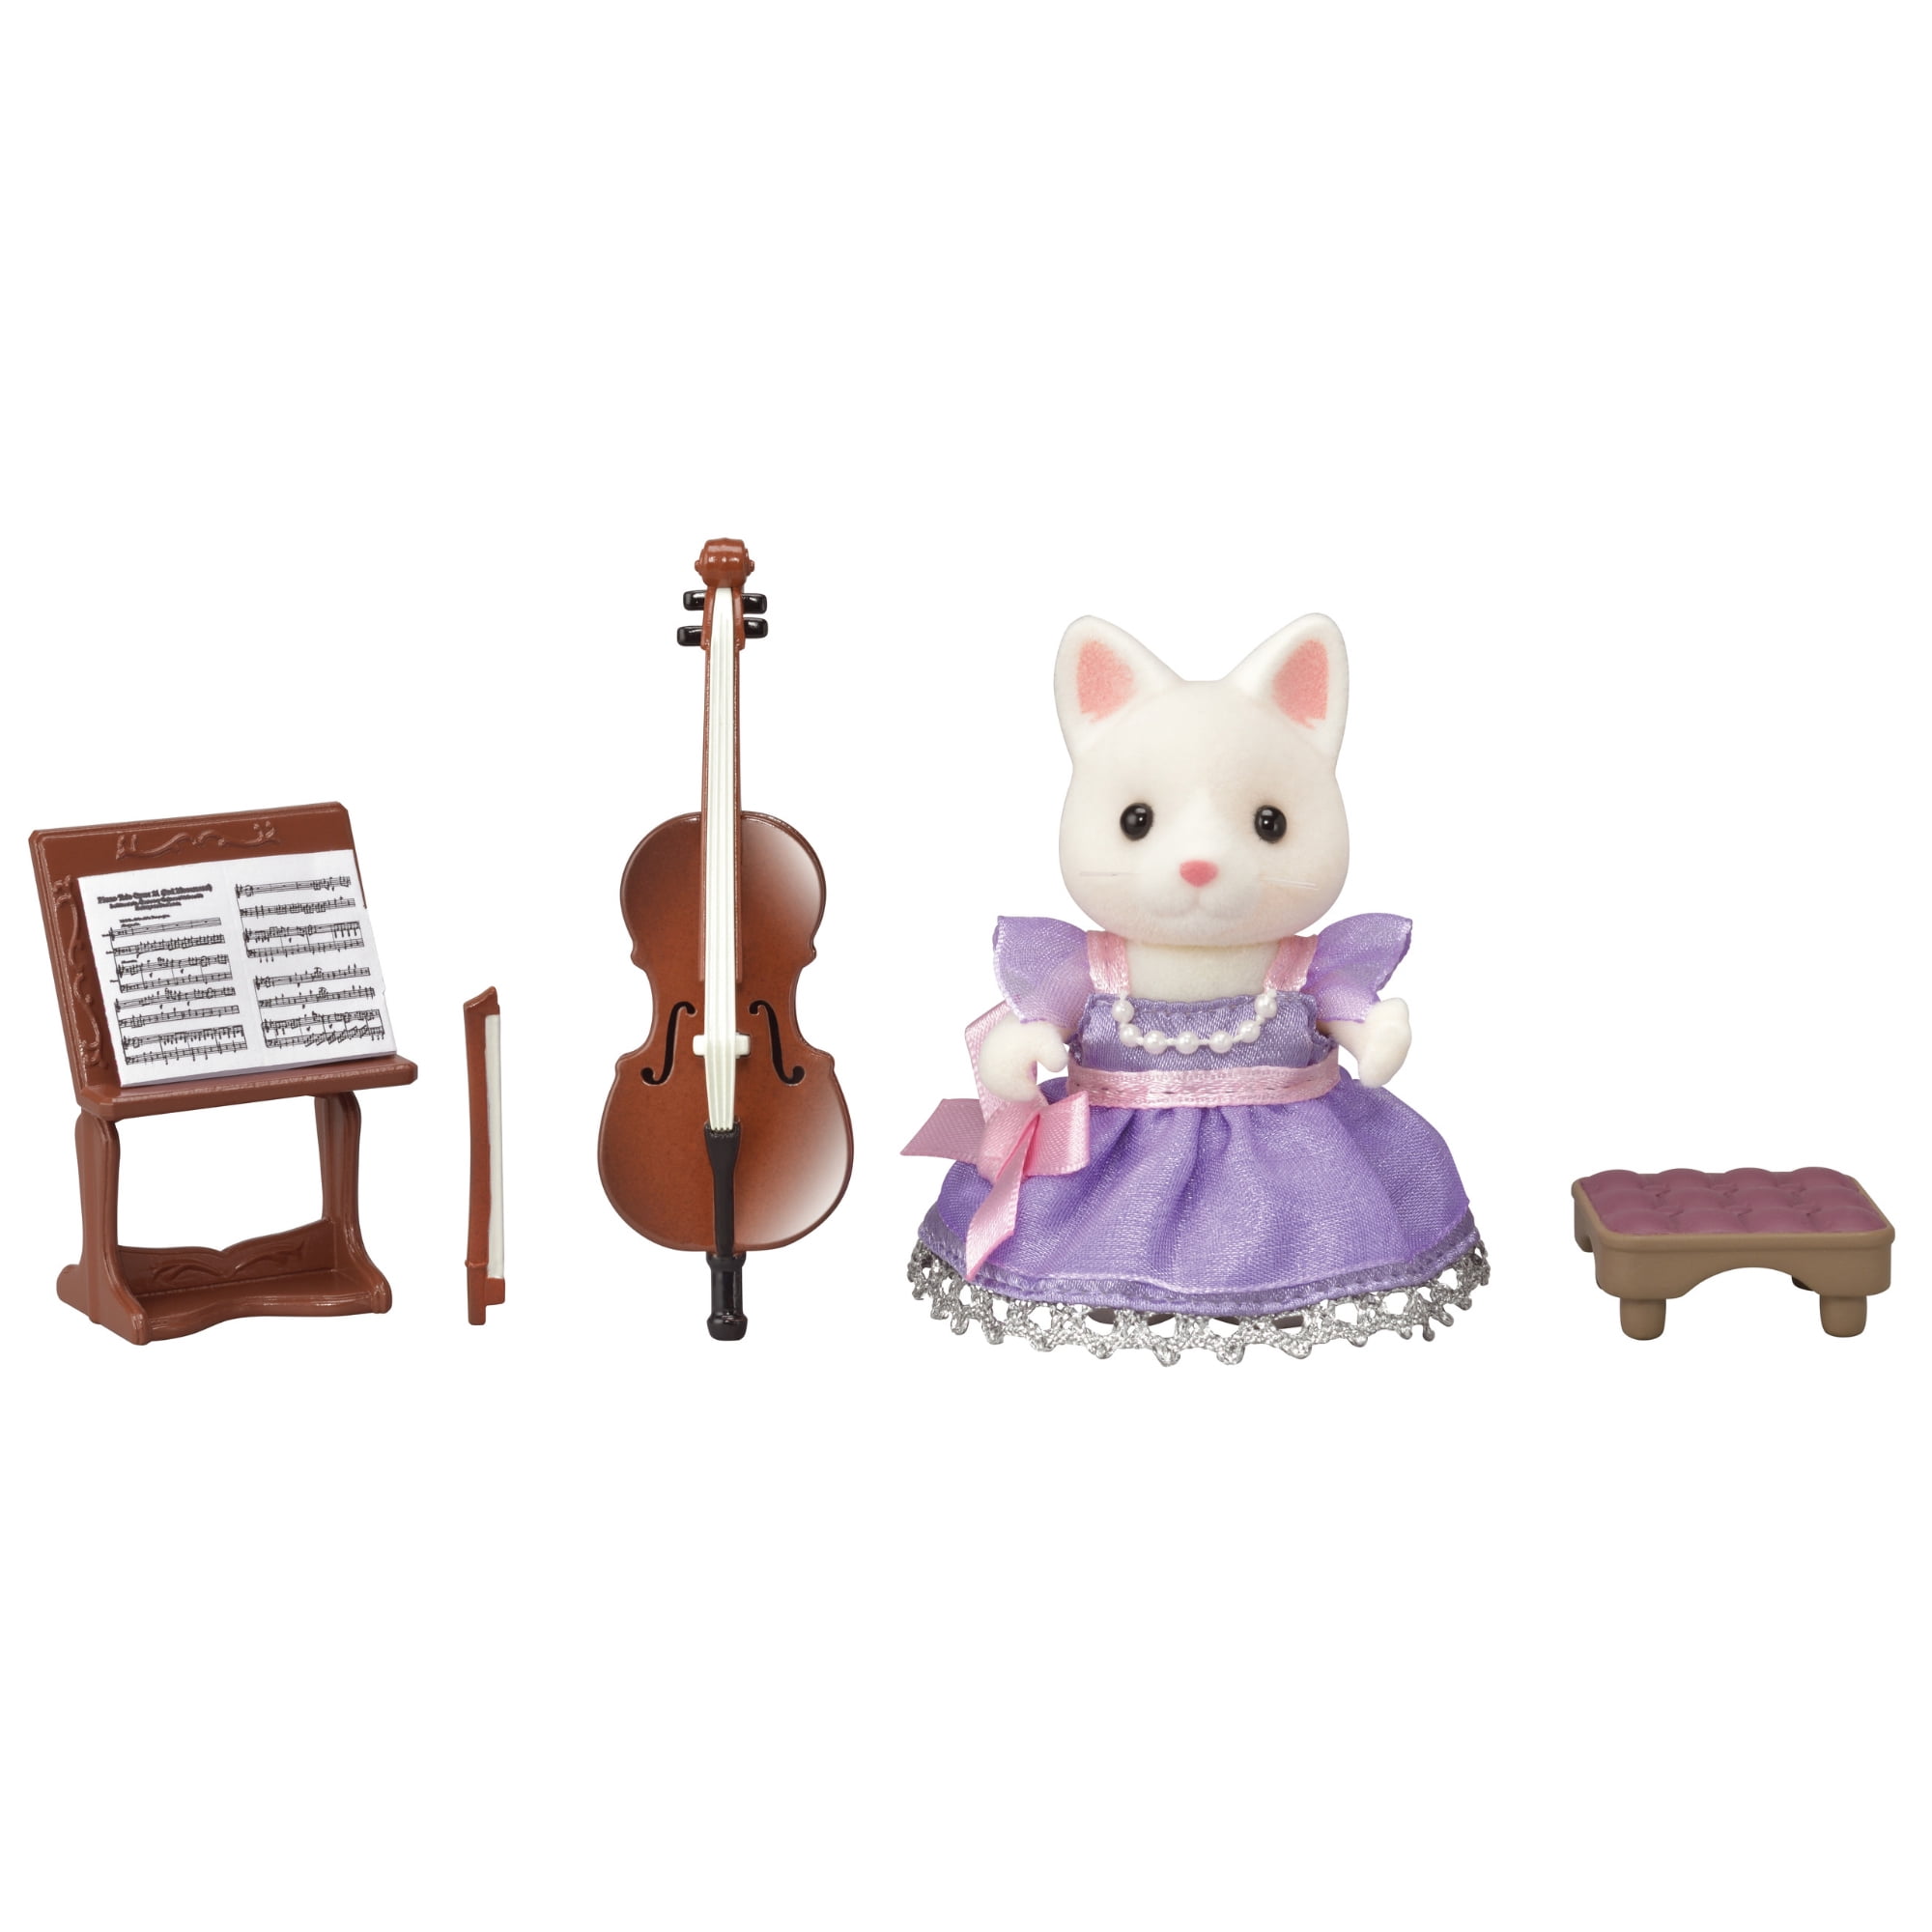 New unopened Calico Critters Town Grand Piano Concert Set Lionel Lion Toy HTF $$ 